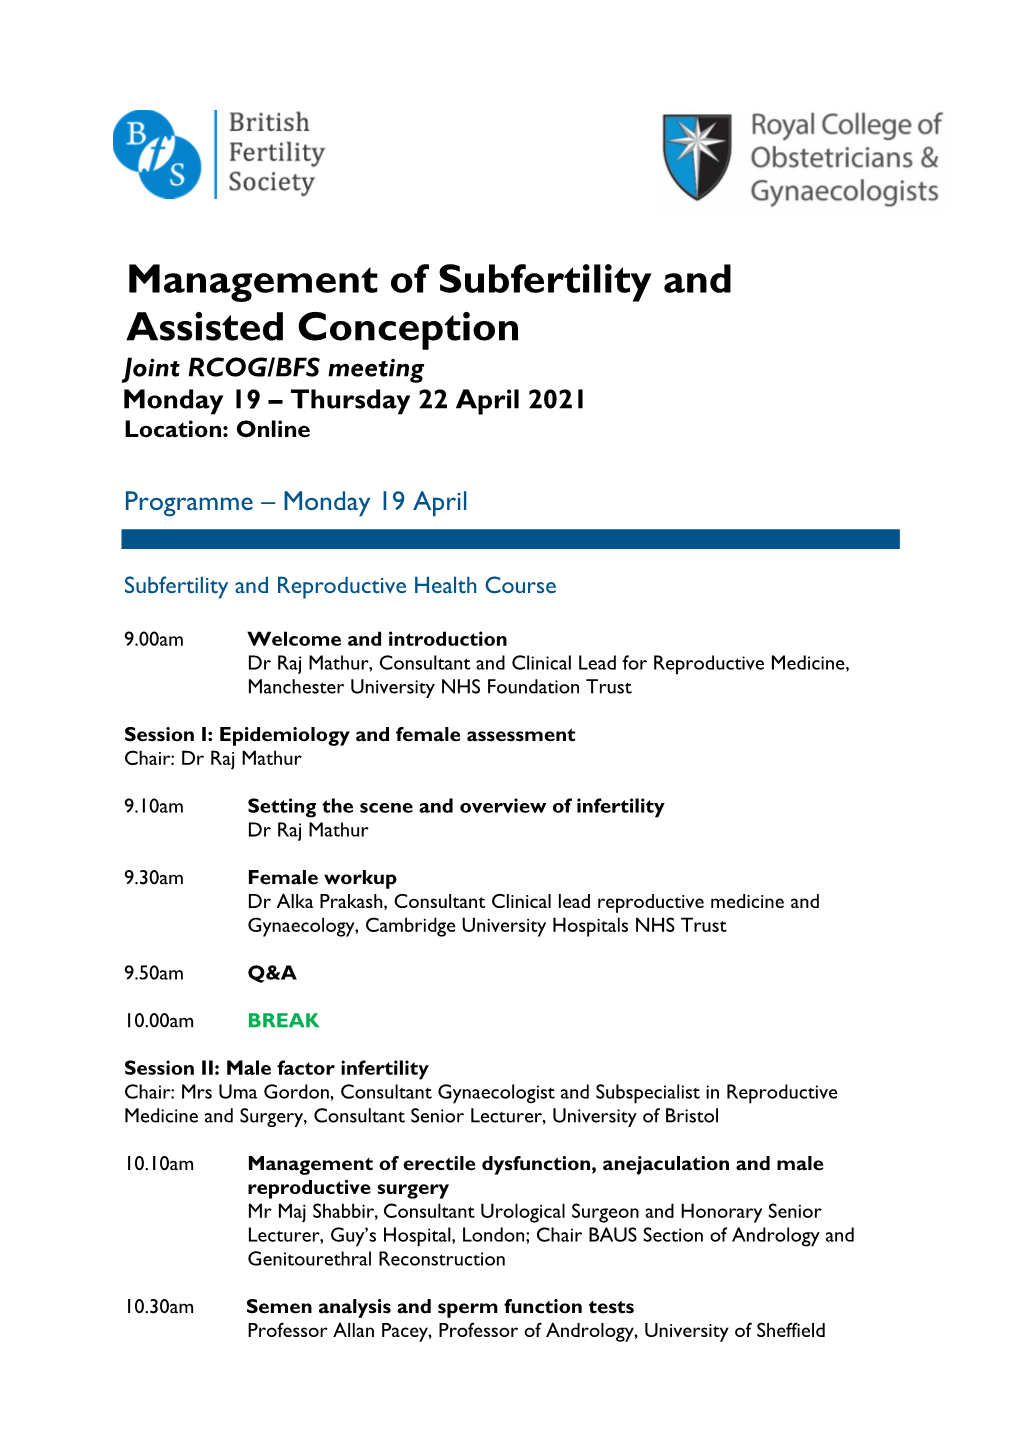 Management of Subfertility and Assisted Conception Joint RCOG/BFS Meeting Monday 19 – Thursday 22 April 2021 Location: Online